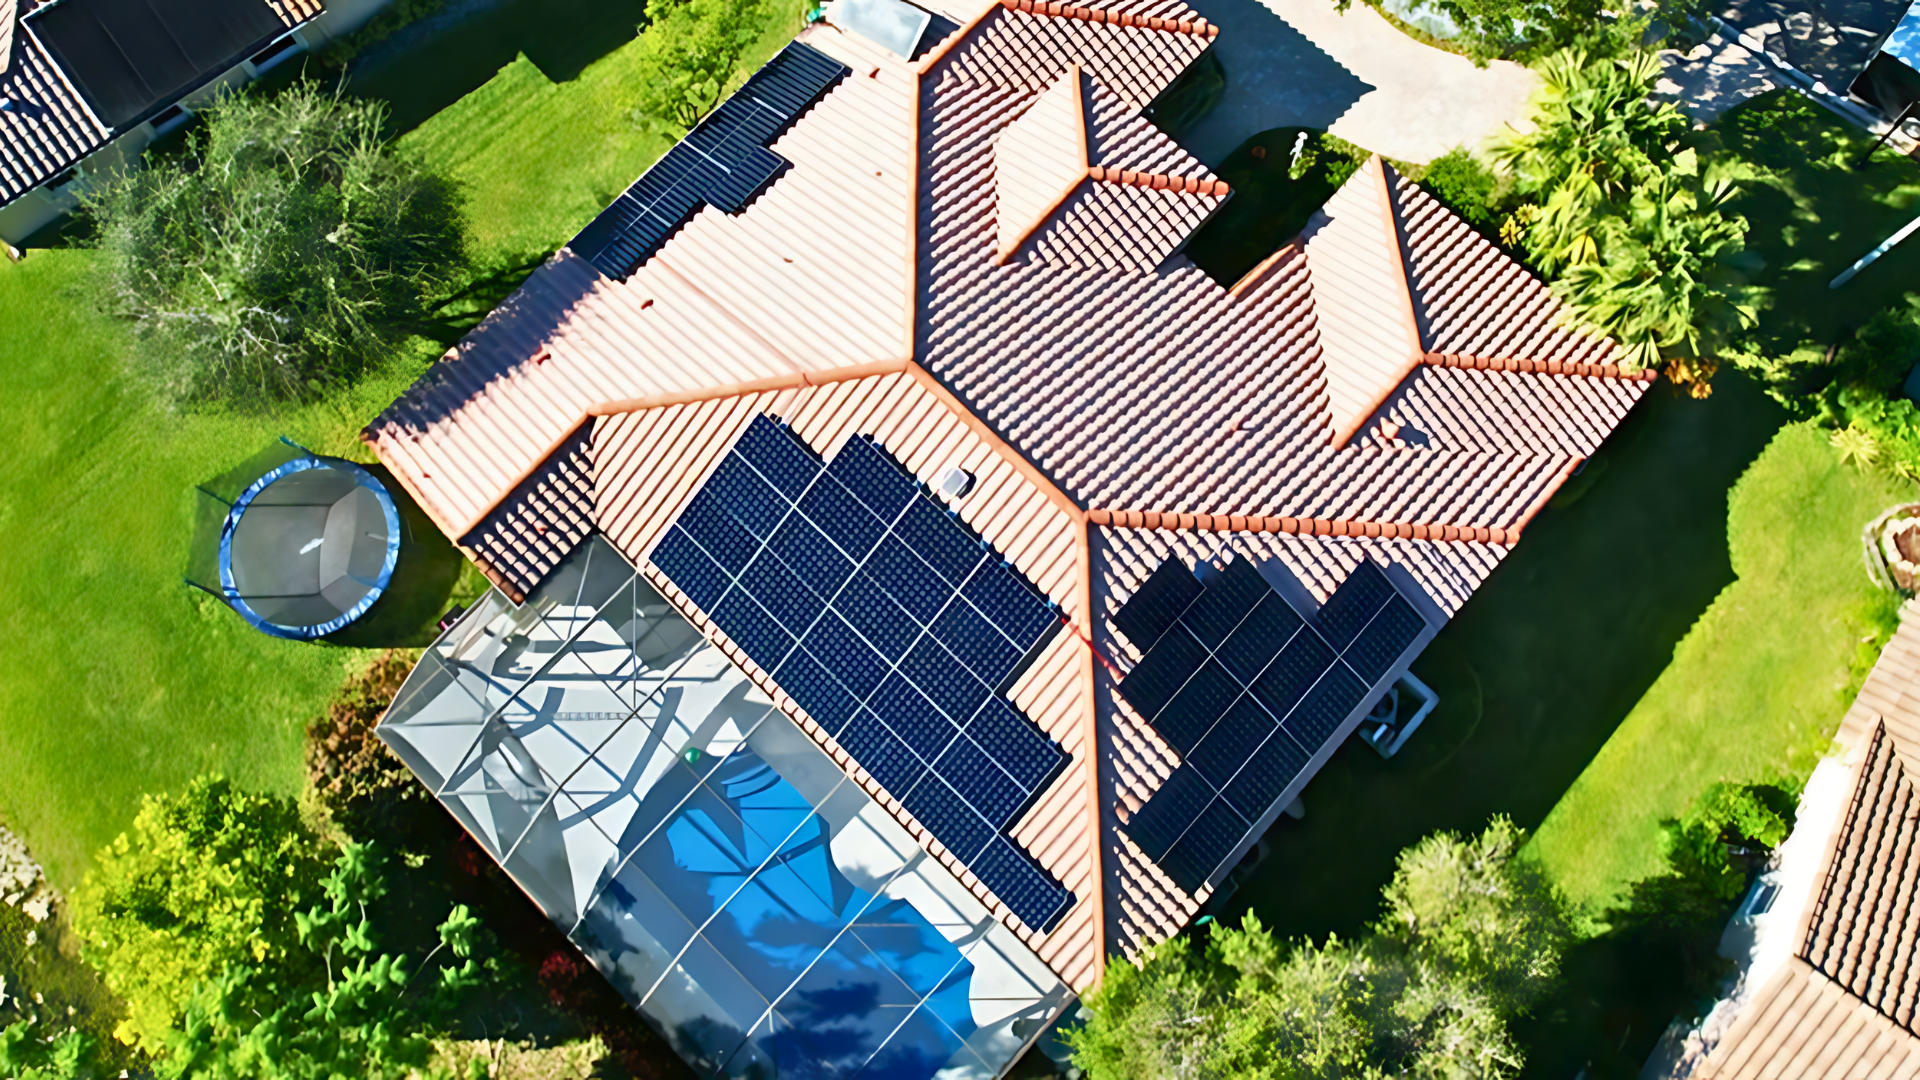 Aerial view of a home in Florida with solar panels installed on the roof, showcasing a solar energy and battery storage system integrated into a residential property with a trampoline and well-maintained yard.